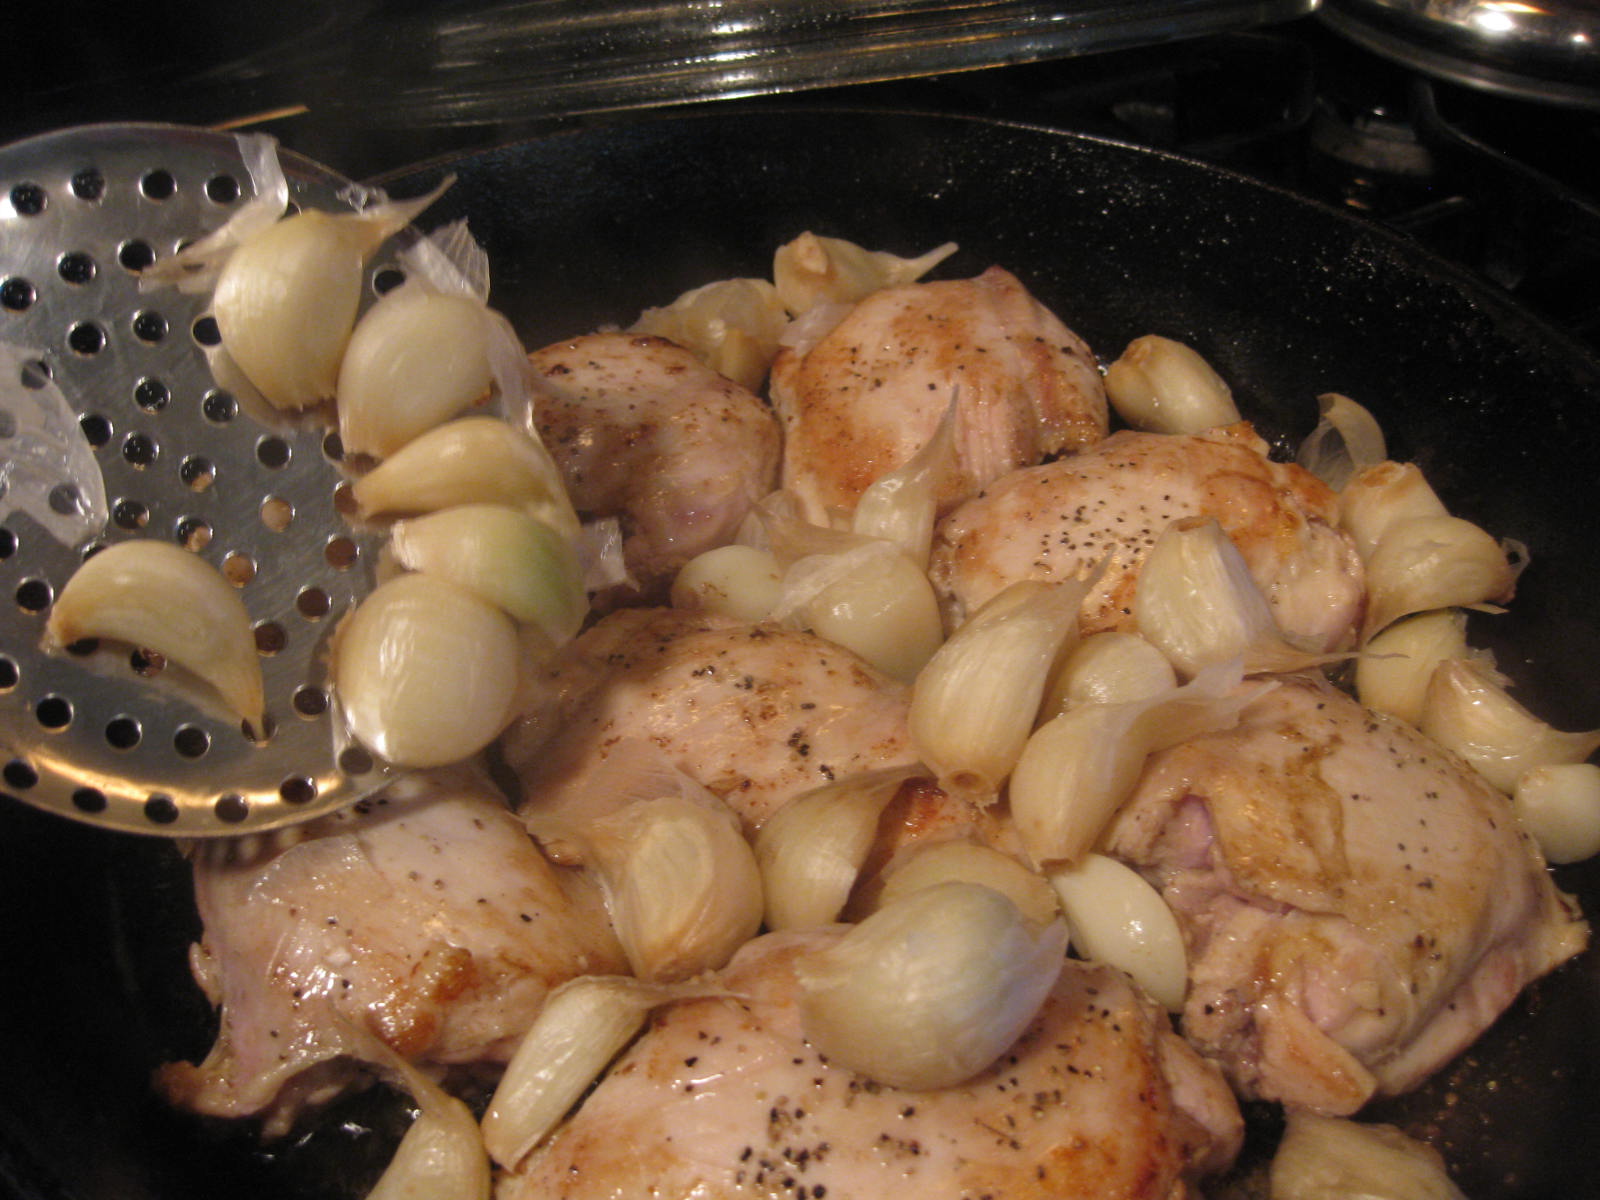 ... blanched garlic cloves to the skillet. Arrange the cloves on top of